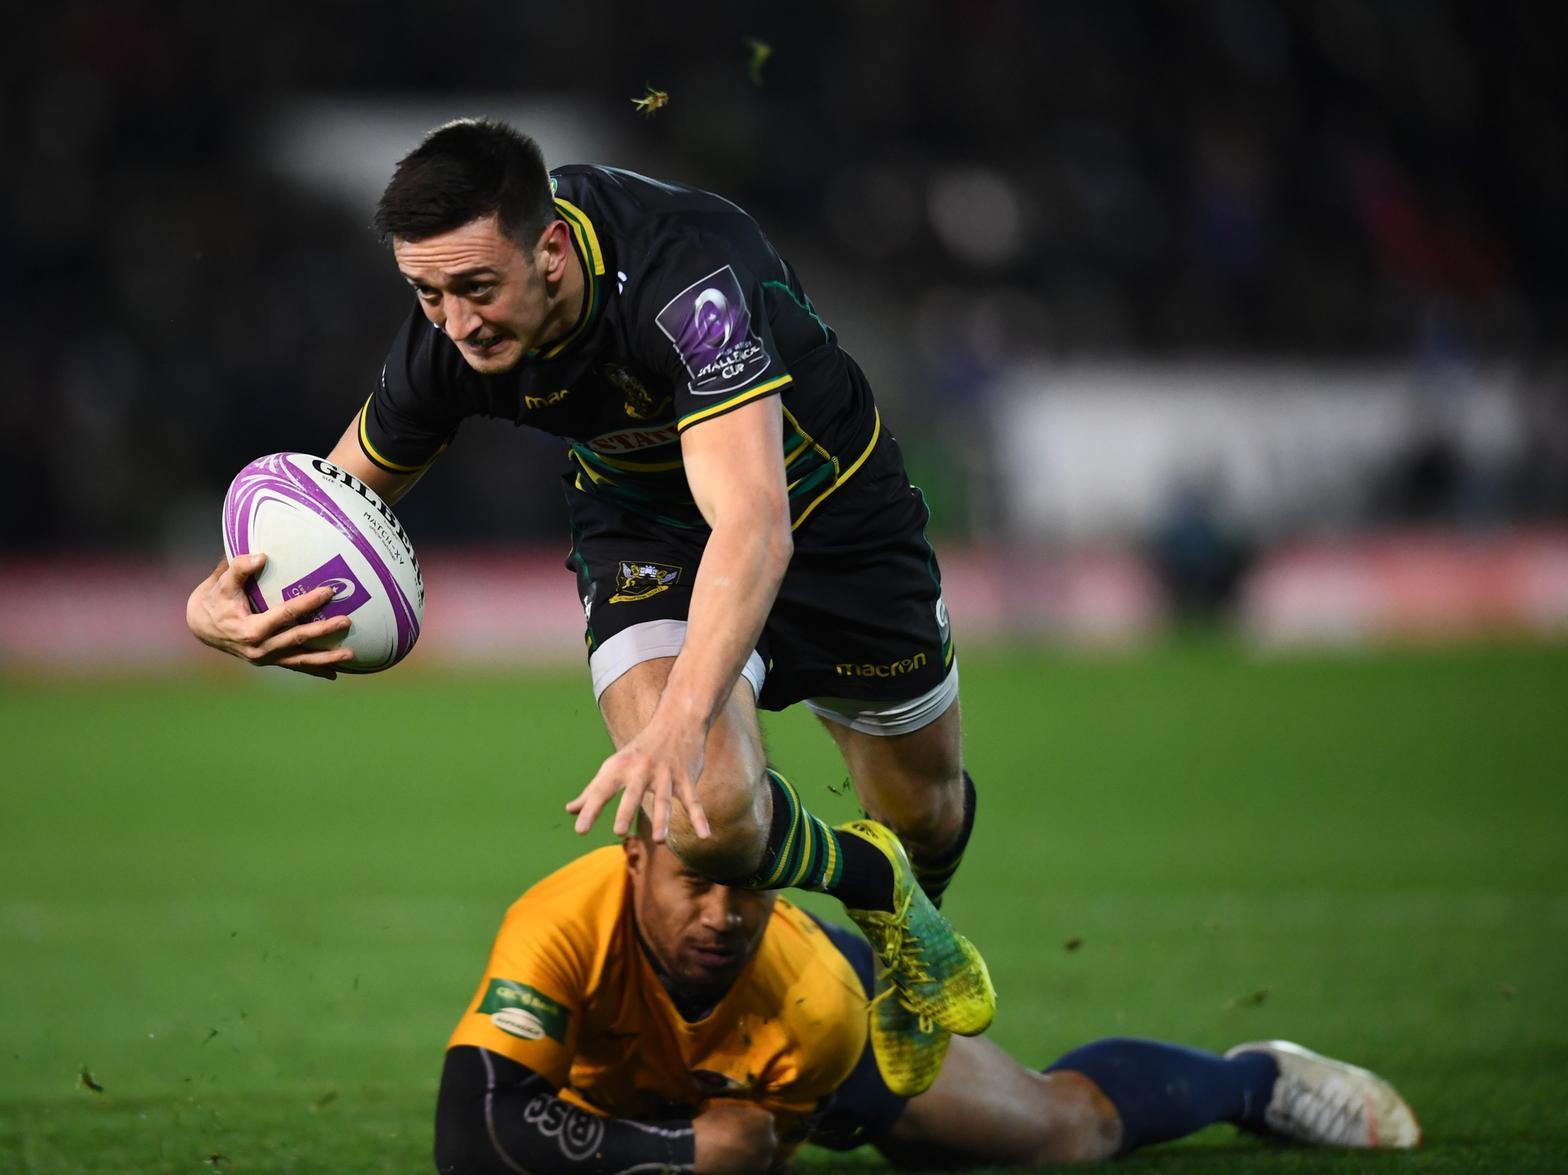 The scrum-half was Saints' young player of the year last season but picked up a knee injury playing for England against the Barbarians during the summer